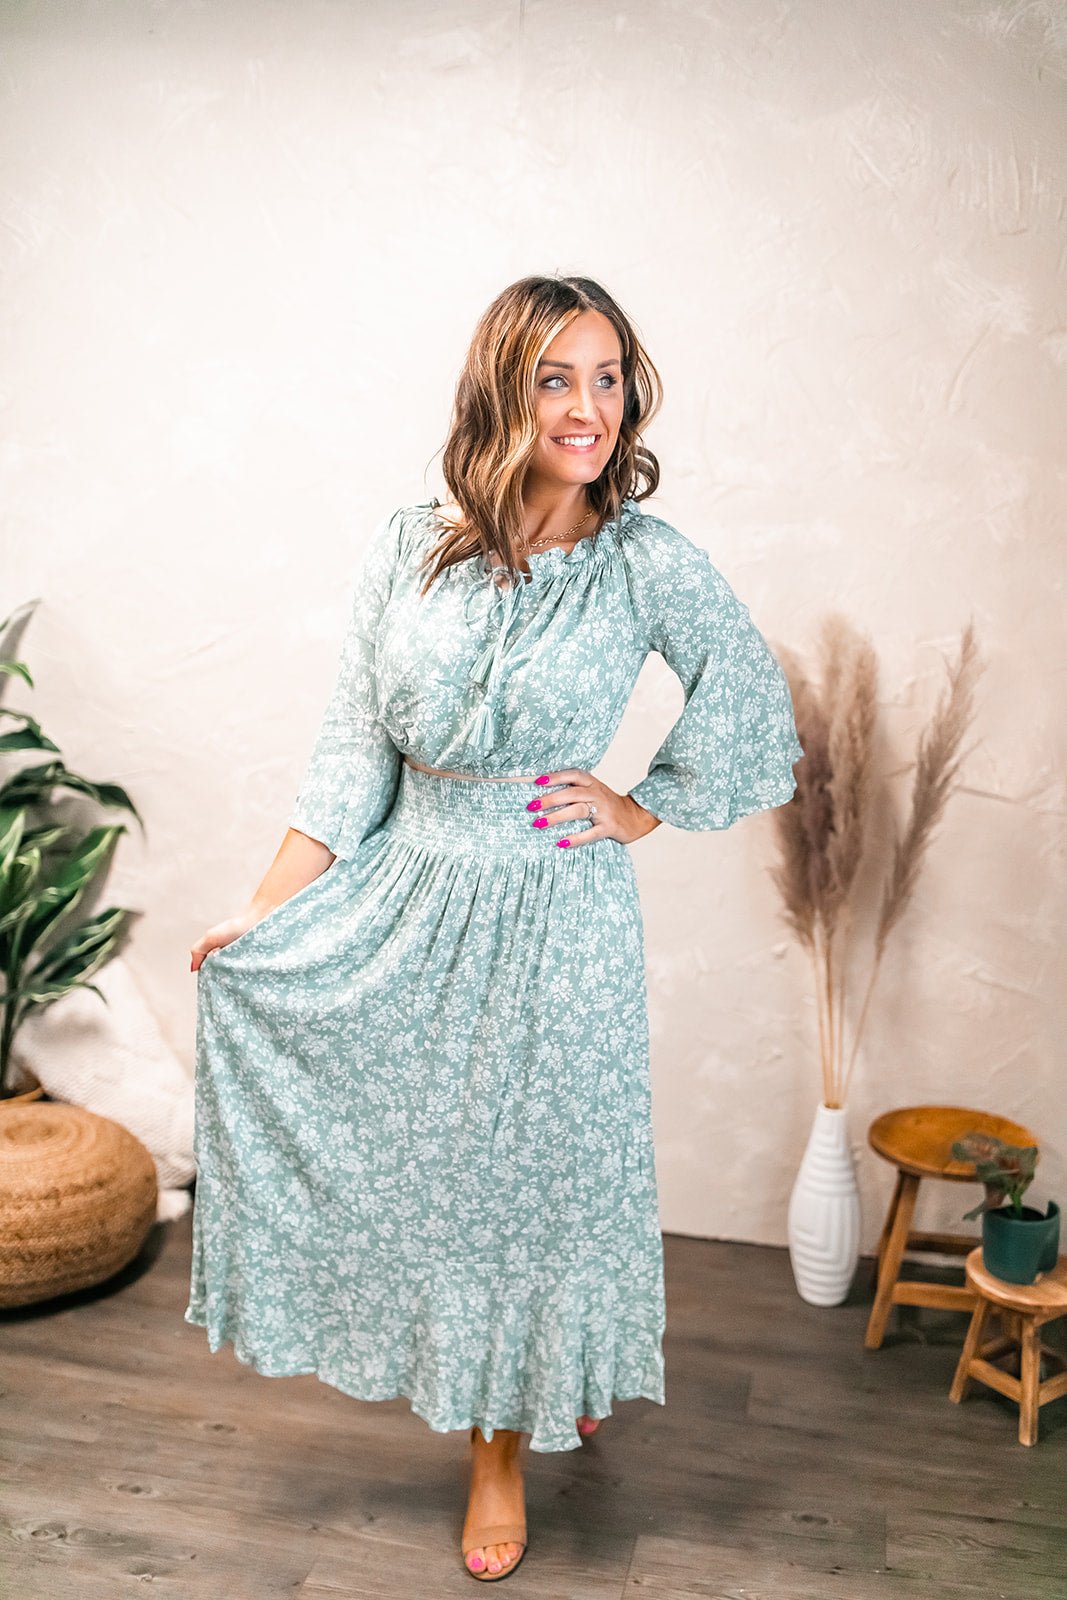 One Eleven Olive Boutique The Flora Off the shoulder top The Flora off the shoulder top is too cute by herself but pairs perfectly with The Flora midi skirt to give the look of a dress. The cute top can be worn on or off t